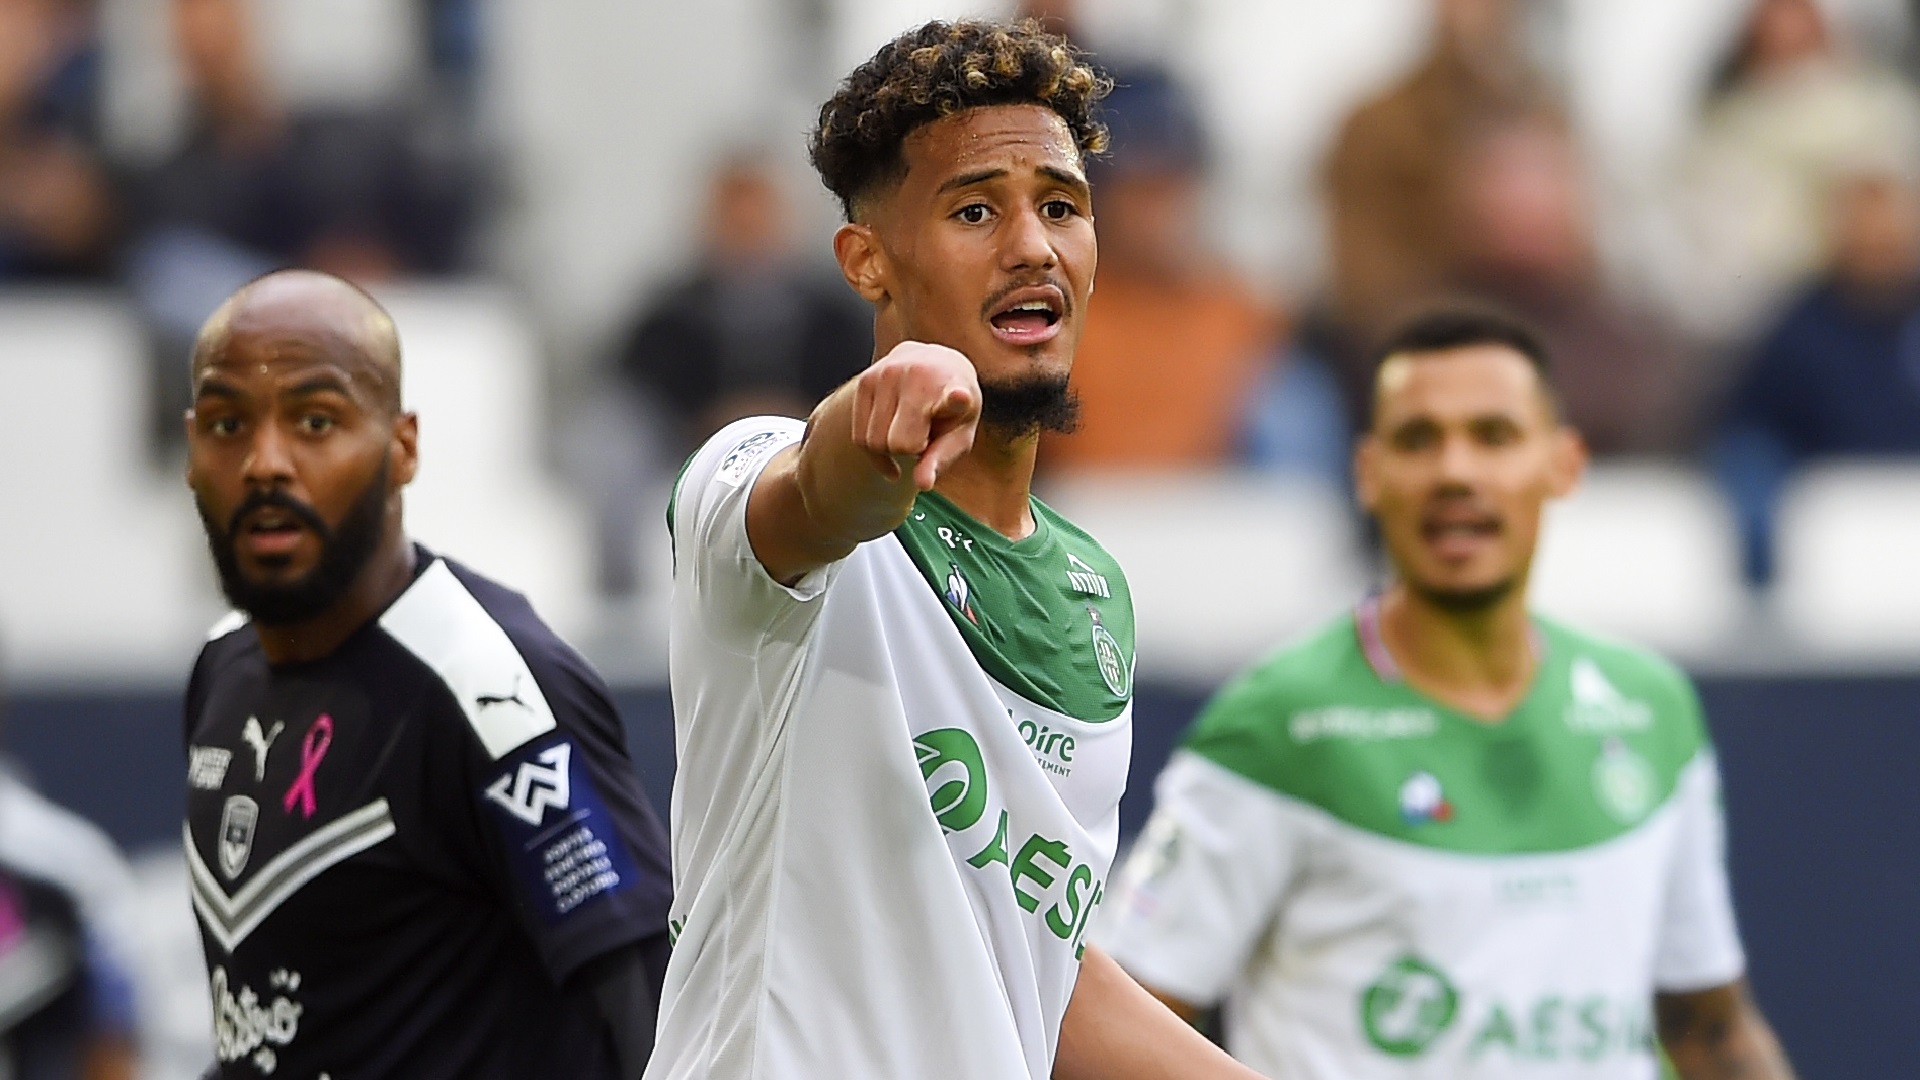 'I have a crush on Arsenal' - Saliba ready for Gunners move despite disappointment at missing Coupe de France final